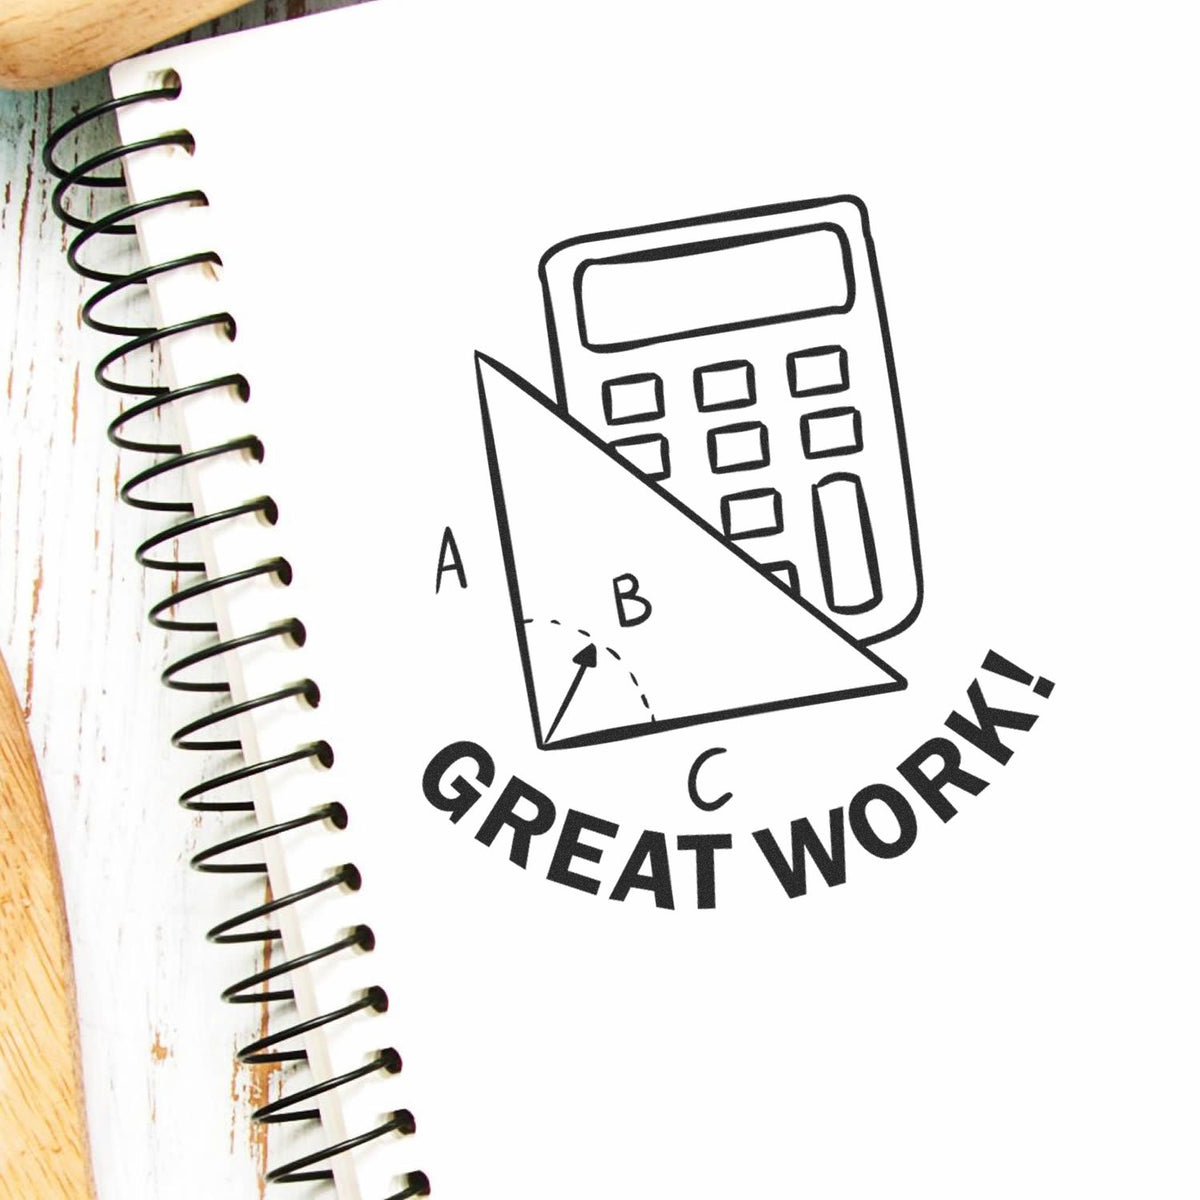 Round Great Work with Calculator Rubber Stamp Lifestyle Photo